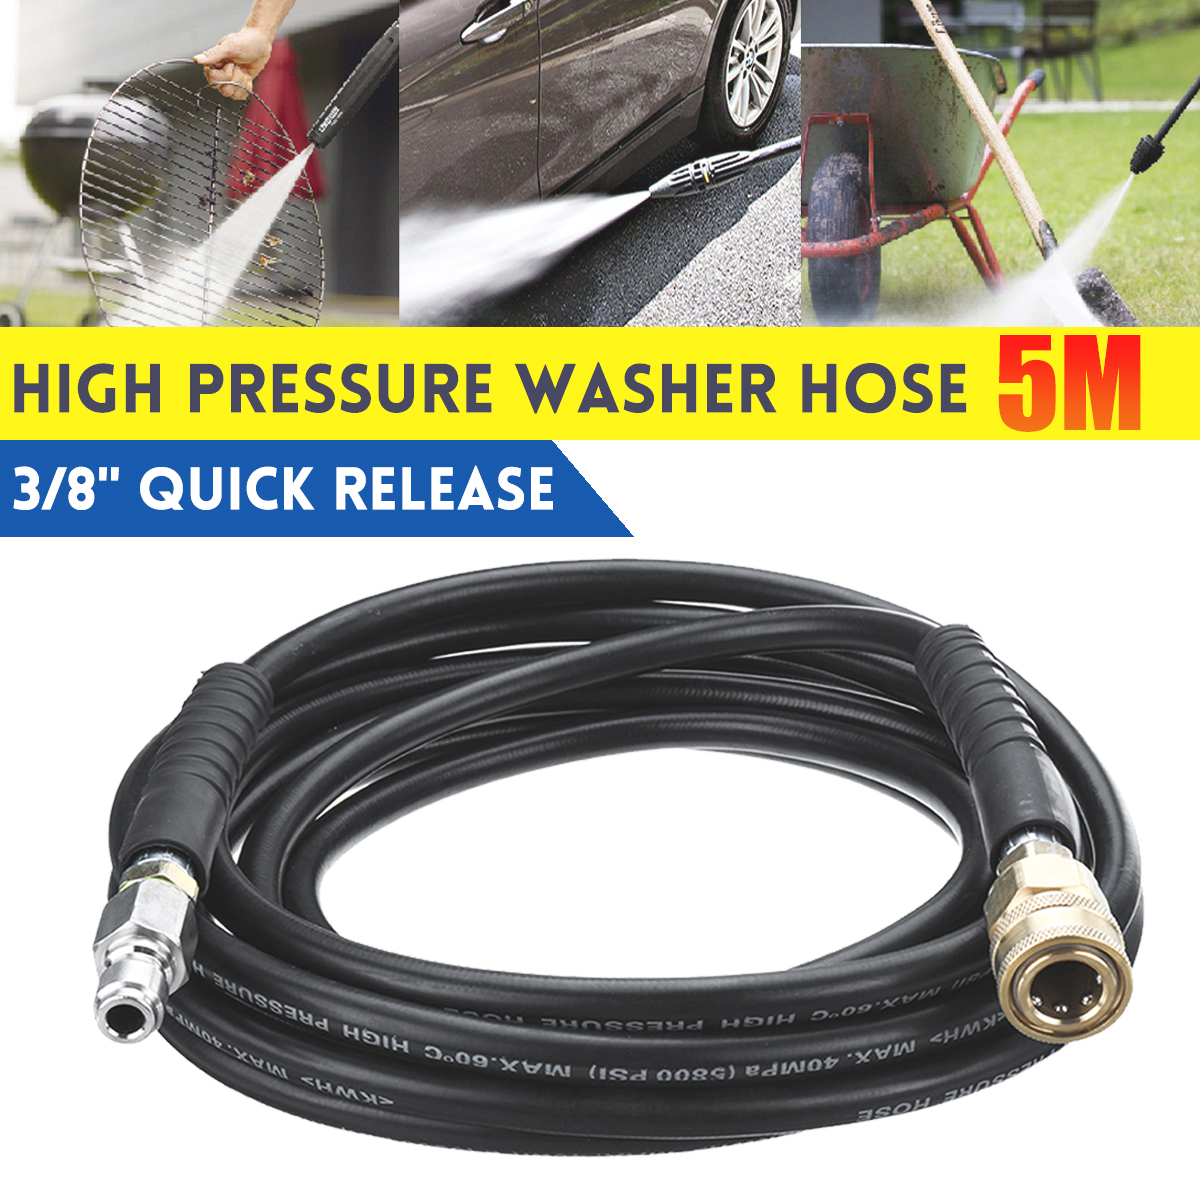 5M-5800PSI-High-Pressure-Washer-Hose-Pipe-Drain-Sewer-Cleaning-Hose-for-Car-Garden-Water-Washer-1558770-1